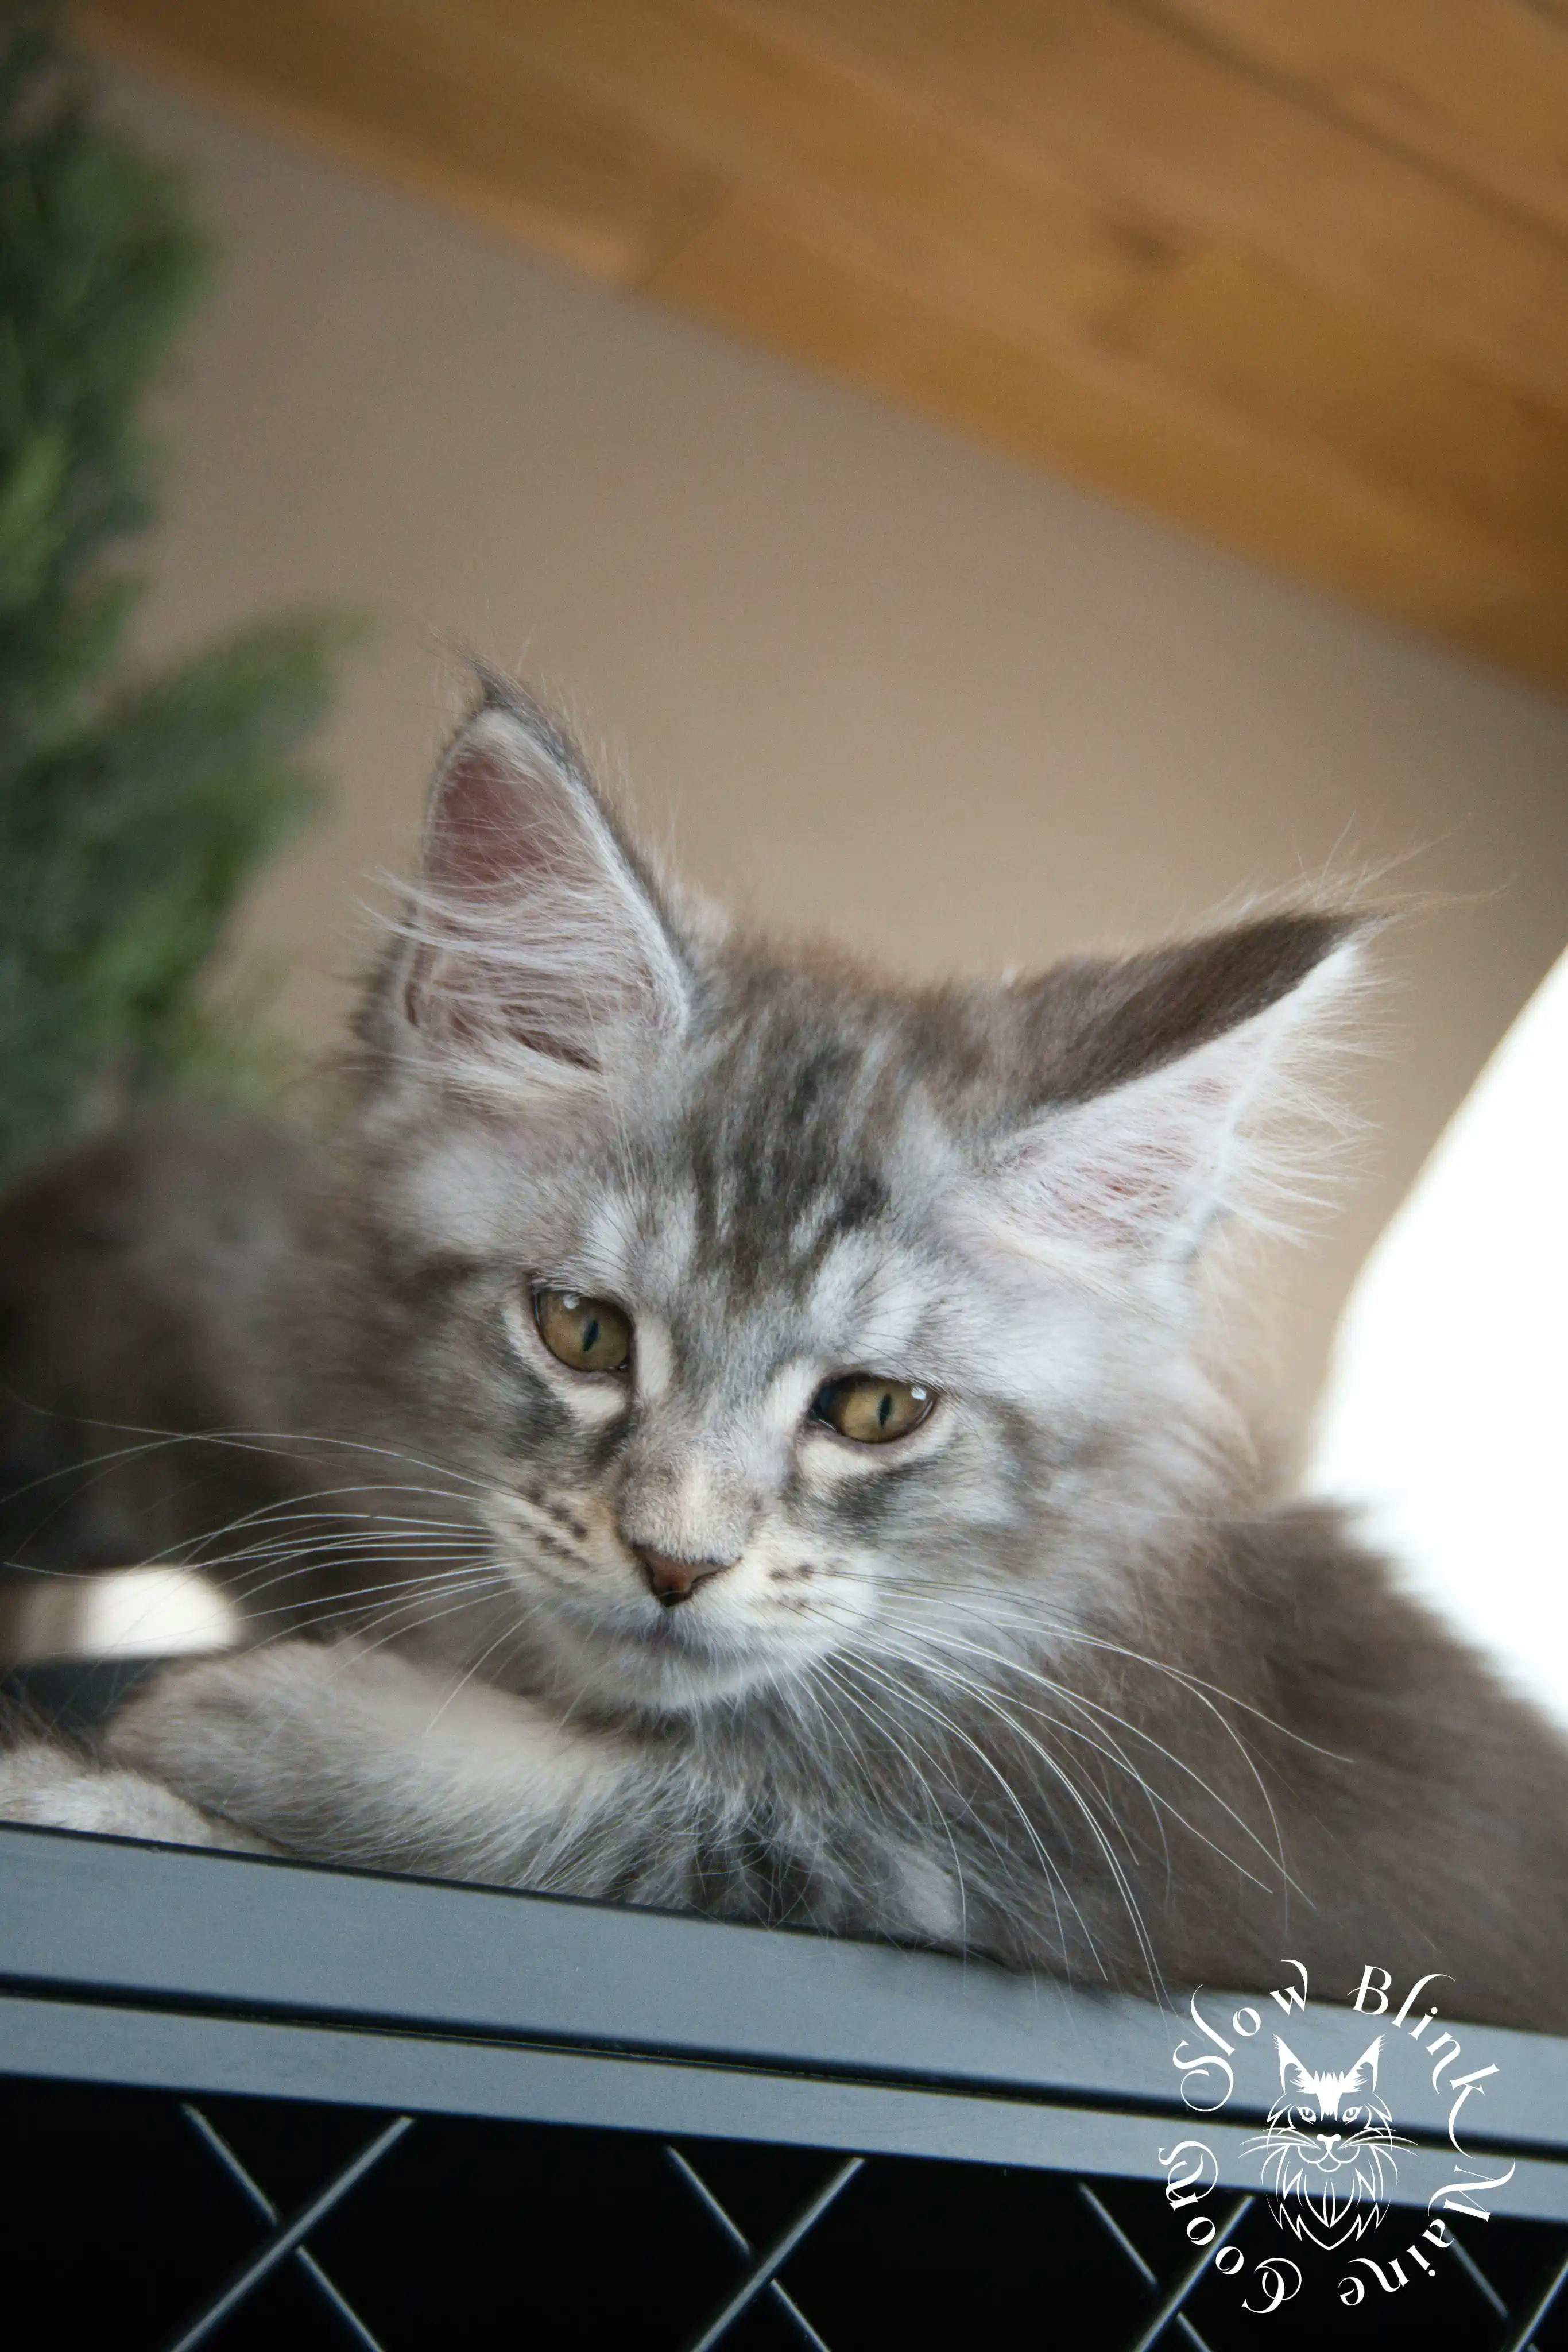 Blue Silver Tabby Maine Coon Kittens > blue silver tabby maine coon kitten | slowblinkmainecoons | 611